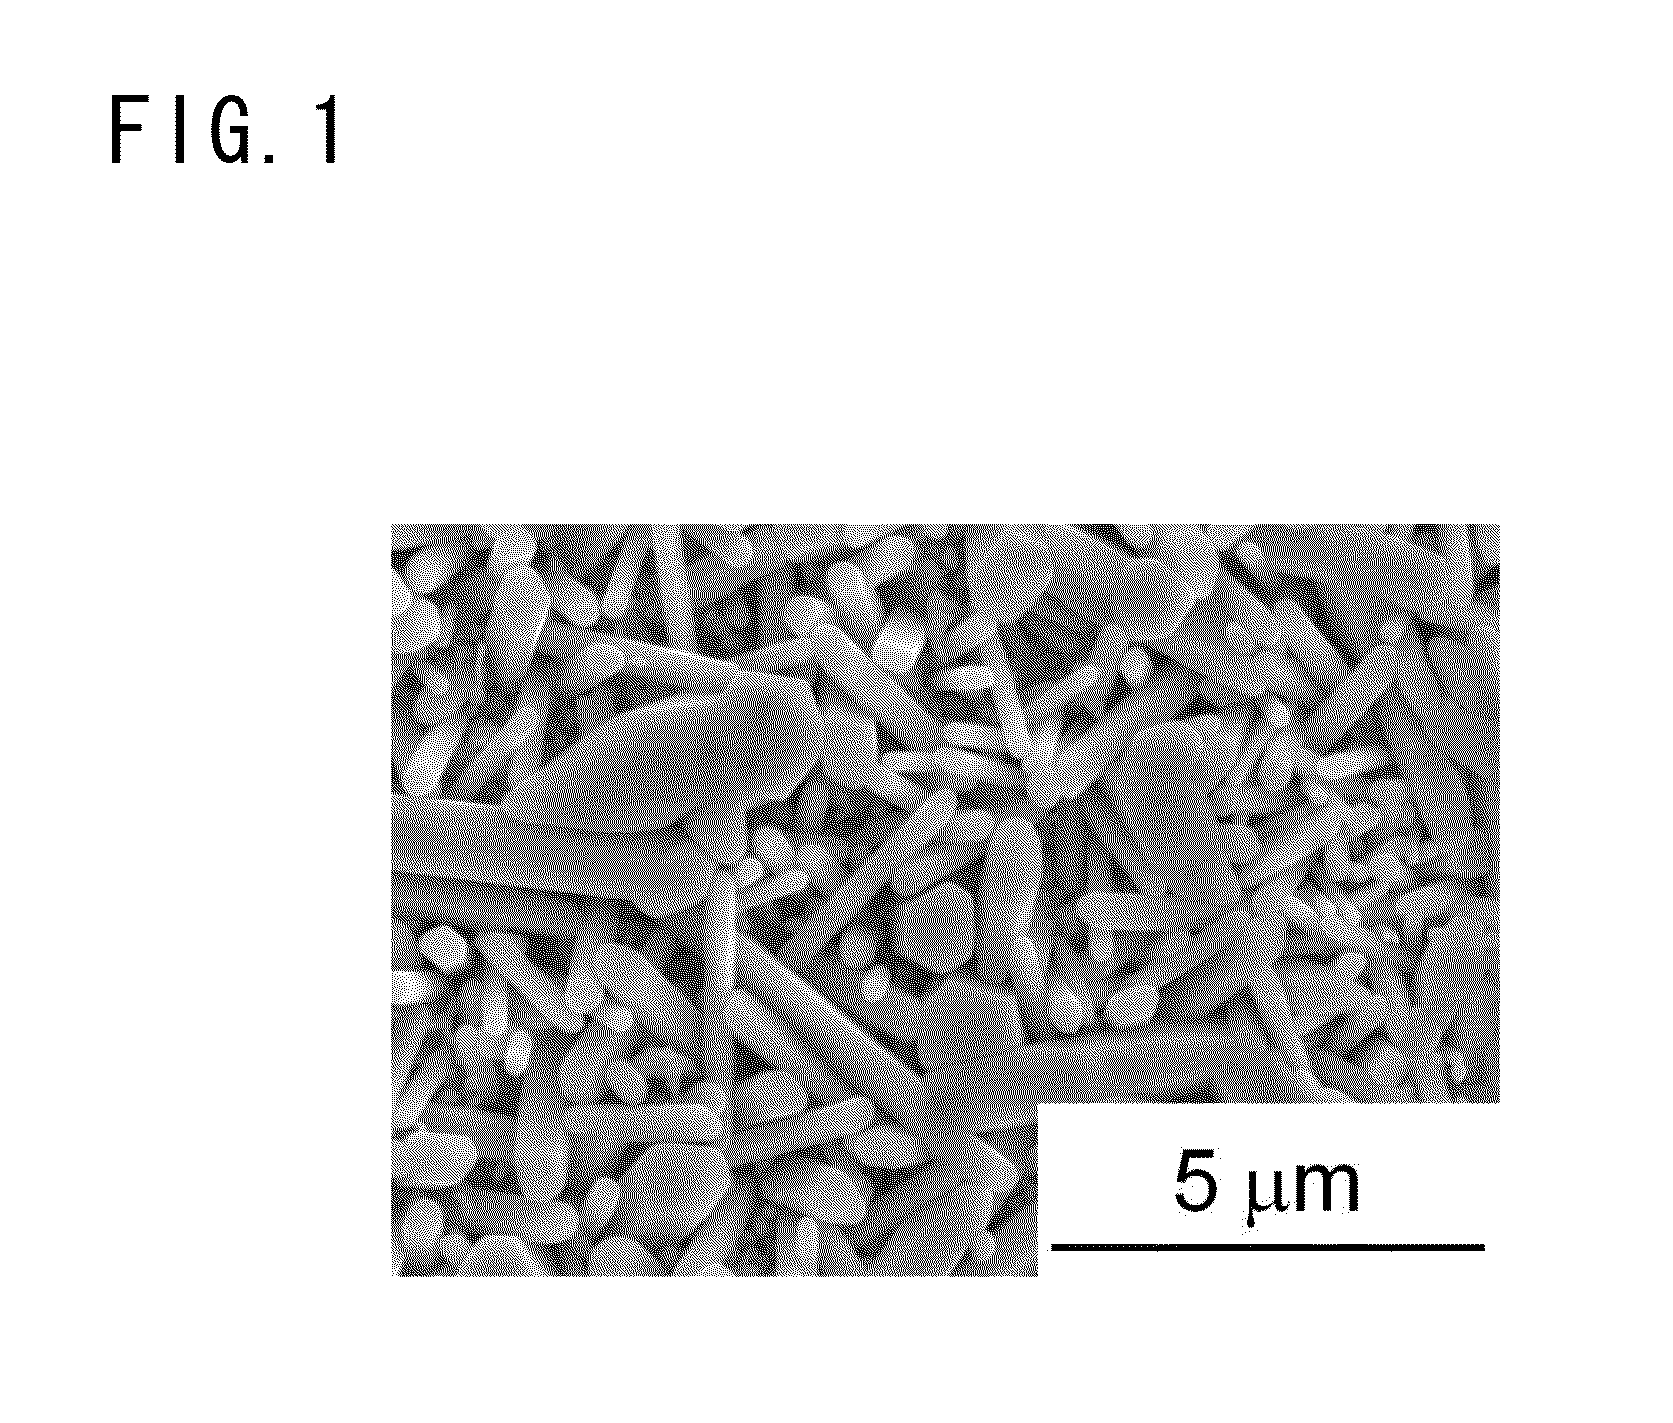 Tin-plated copper-alloy material for terminal and method for producing the same